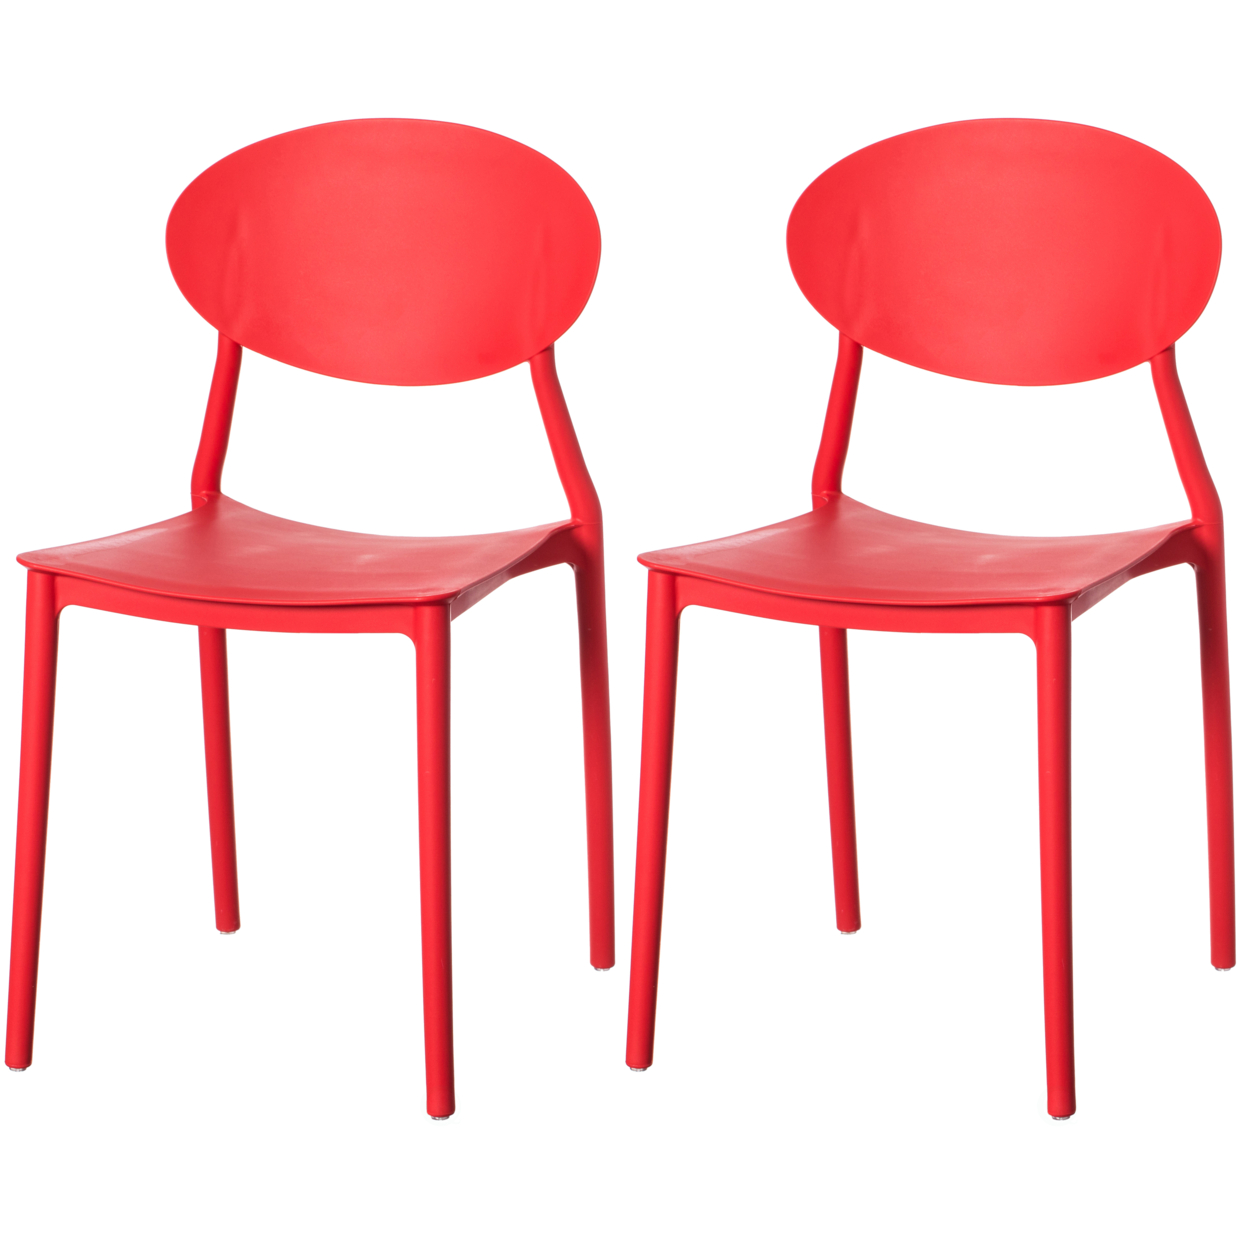 Modern Plastic Outdoor Dining Chair With Open Oval Back Design - Set Of 2 Red